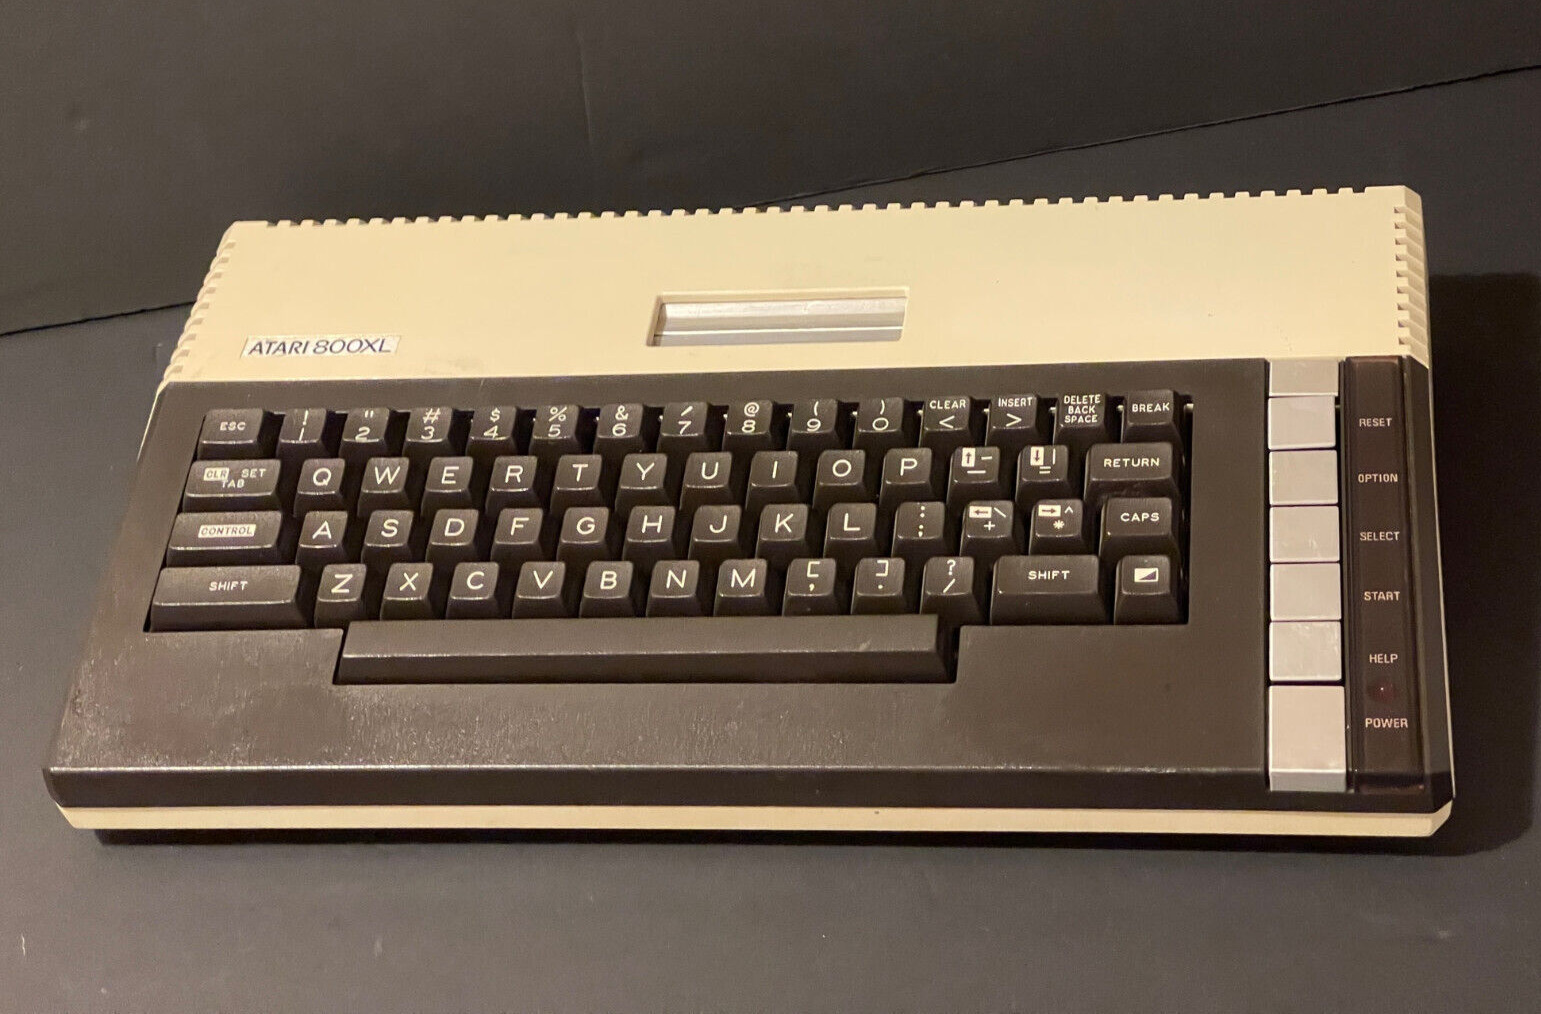 Atari 800XL Vintage Home Computer PreOwned in Very Good Condition